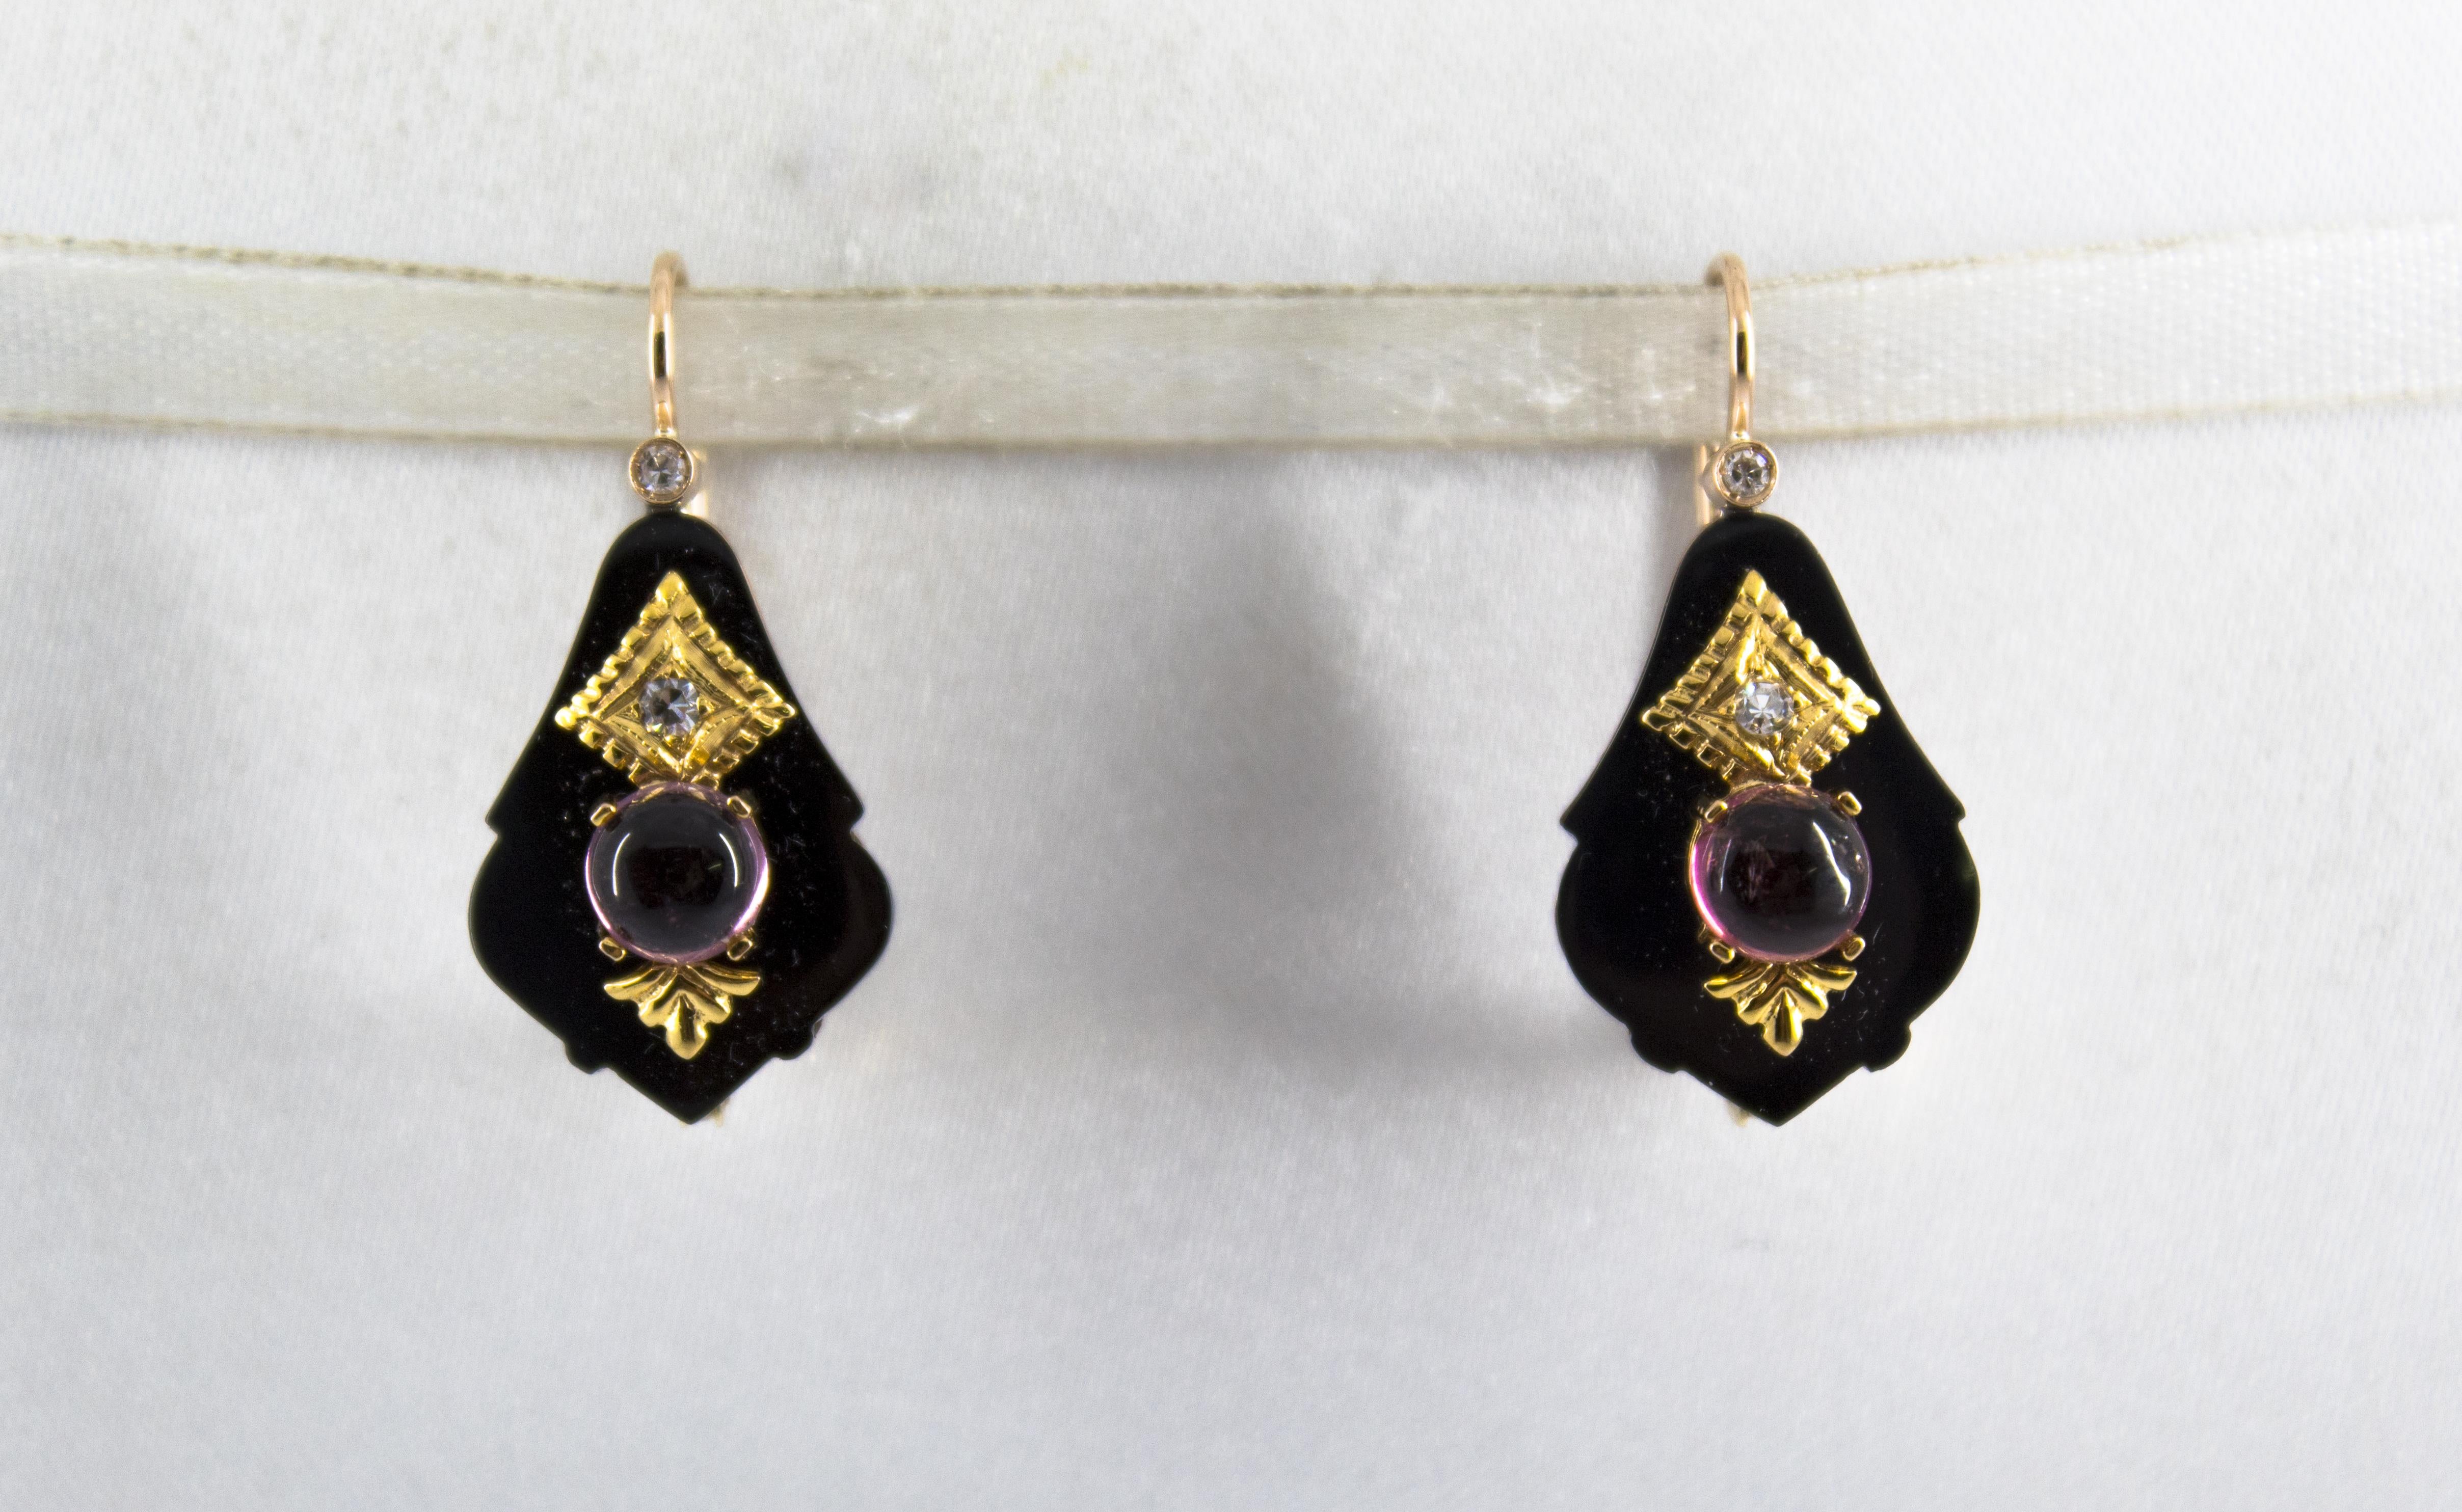 These Earrings are made of 14K Yellow Gold.
These Earrings have 0.14 Carats of White Diamonds.
These Earrings have 2.00 Carats of Tourmaline.
These Earrings have also Onyx.
All our Earrings have pins for pierced ears but we can change the closure